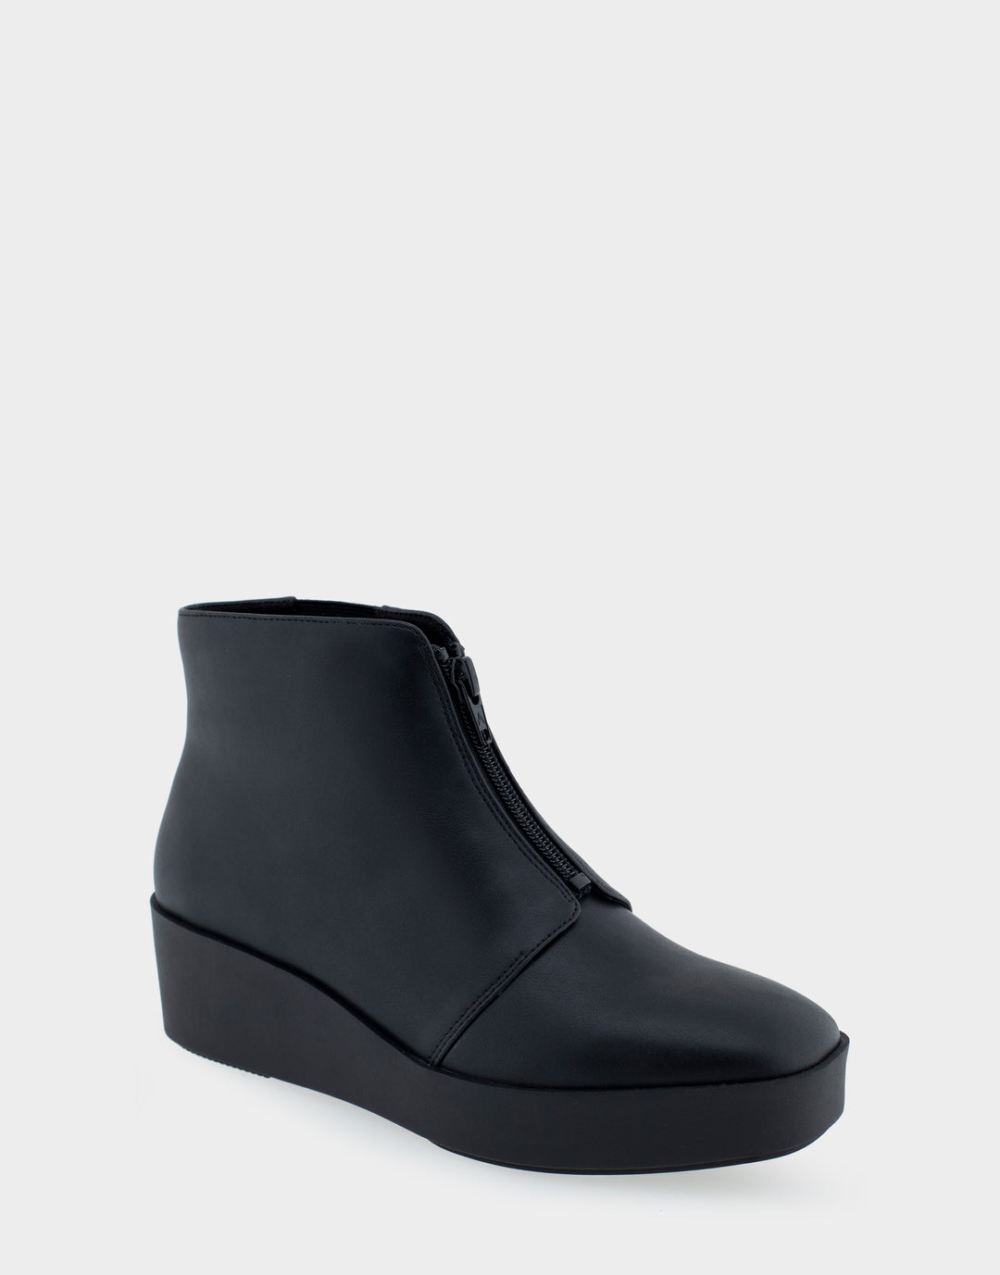 Women's | Carin Black Faux Leather Wedge Heel Ankle Boot